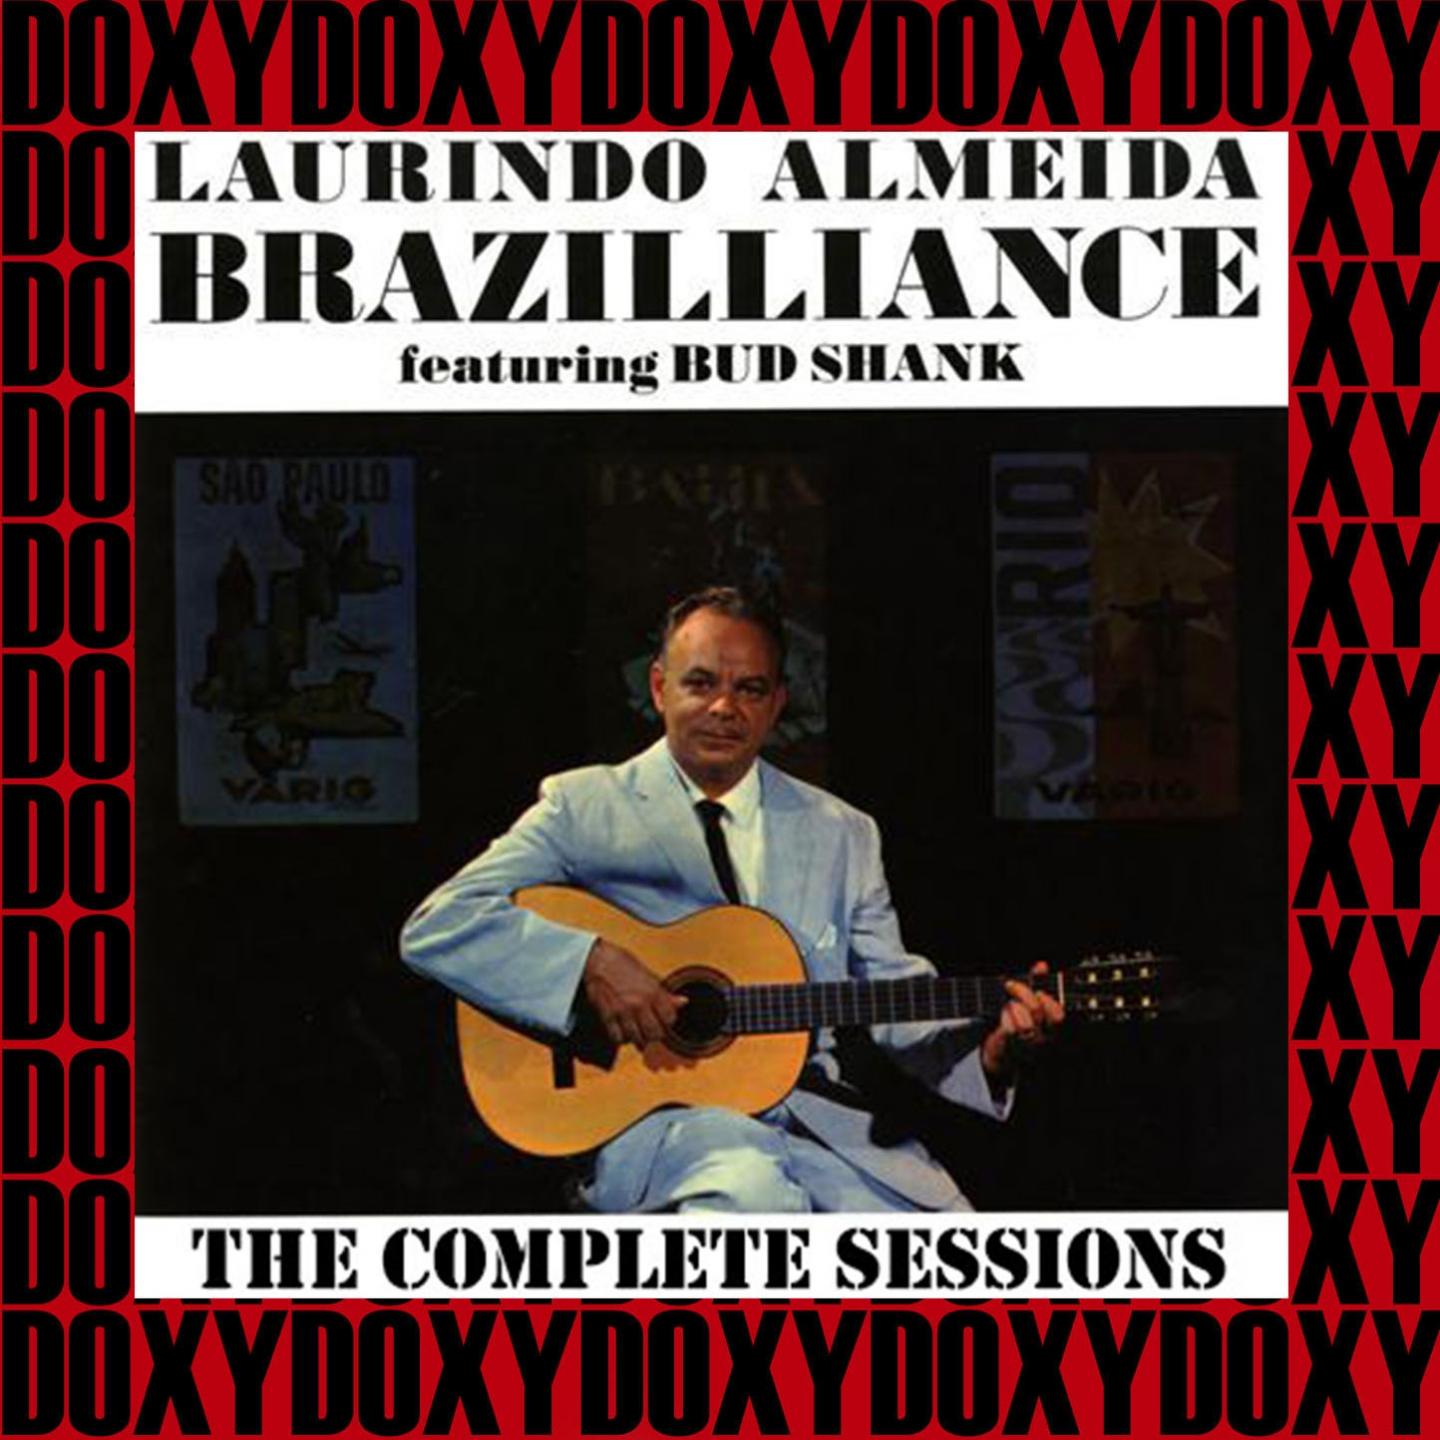 Постер альбома Brazilliance The Complete Sessions (Doxy Collection, Remastered)